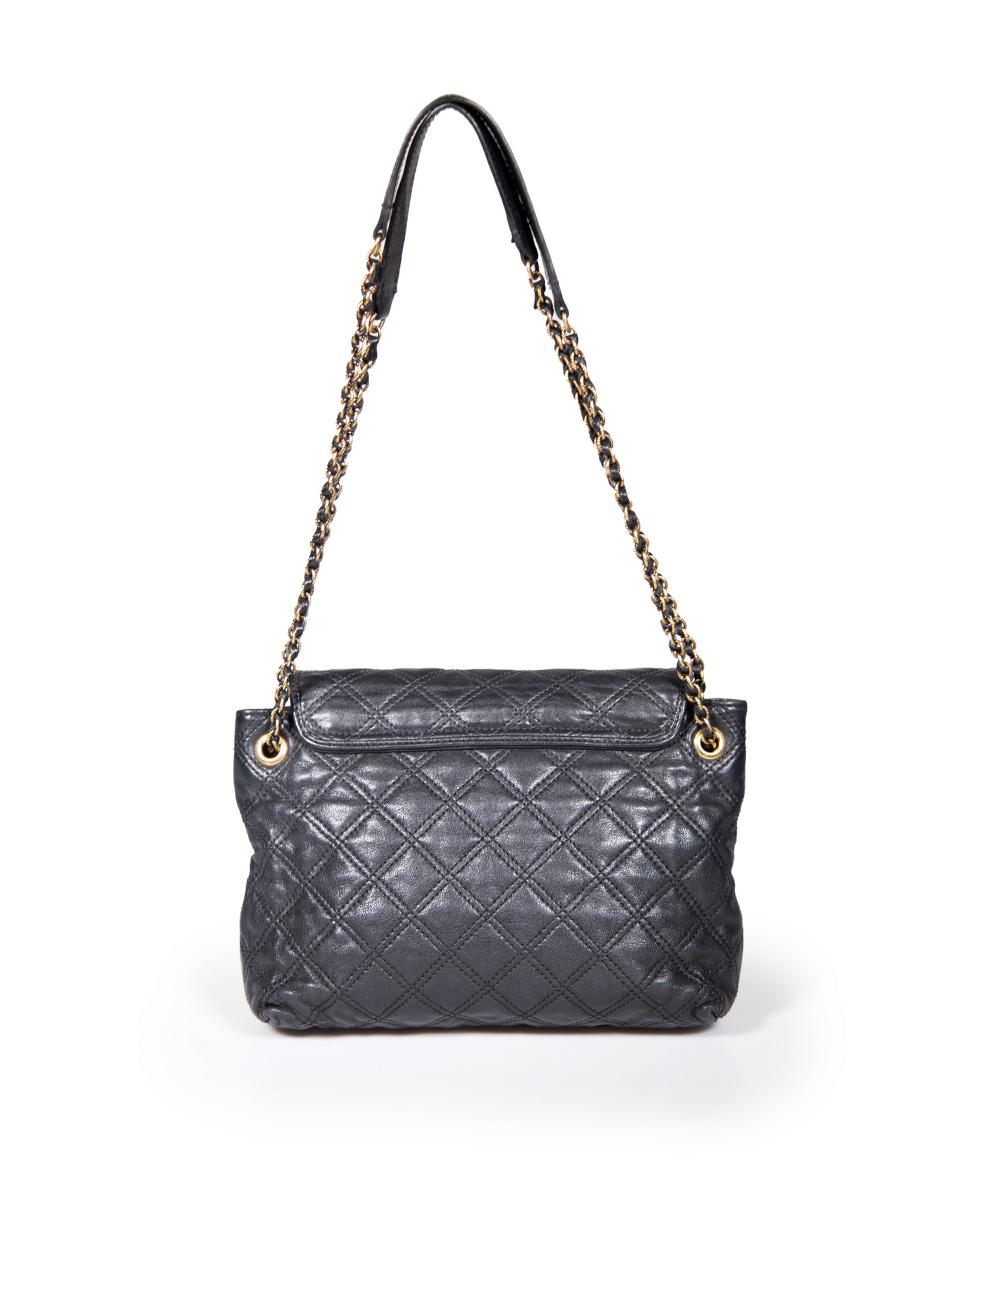 Marc Jacobs Black Leather Large Single Baroque Shoulder Bag In Good Condition For Sale In London, GB